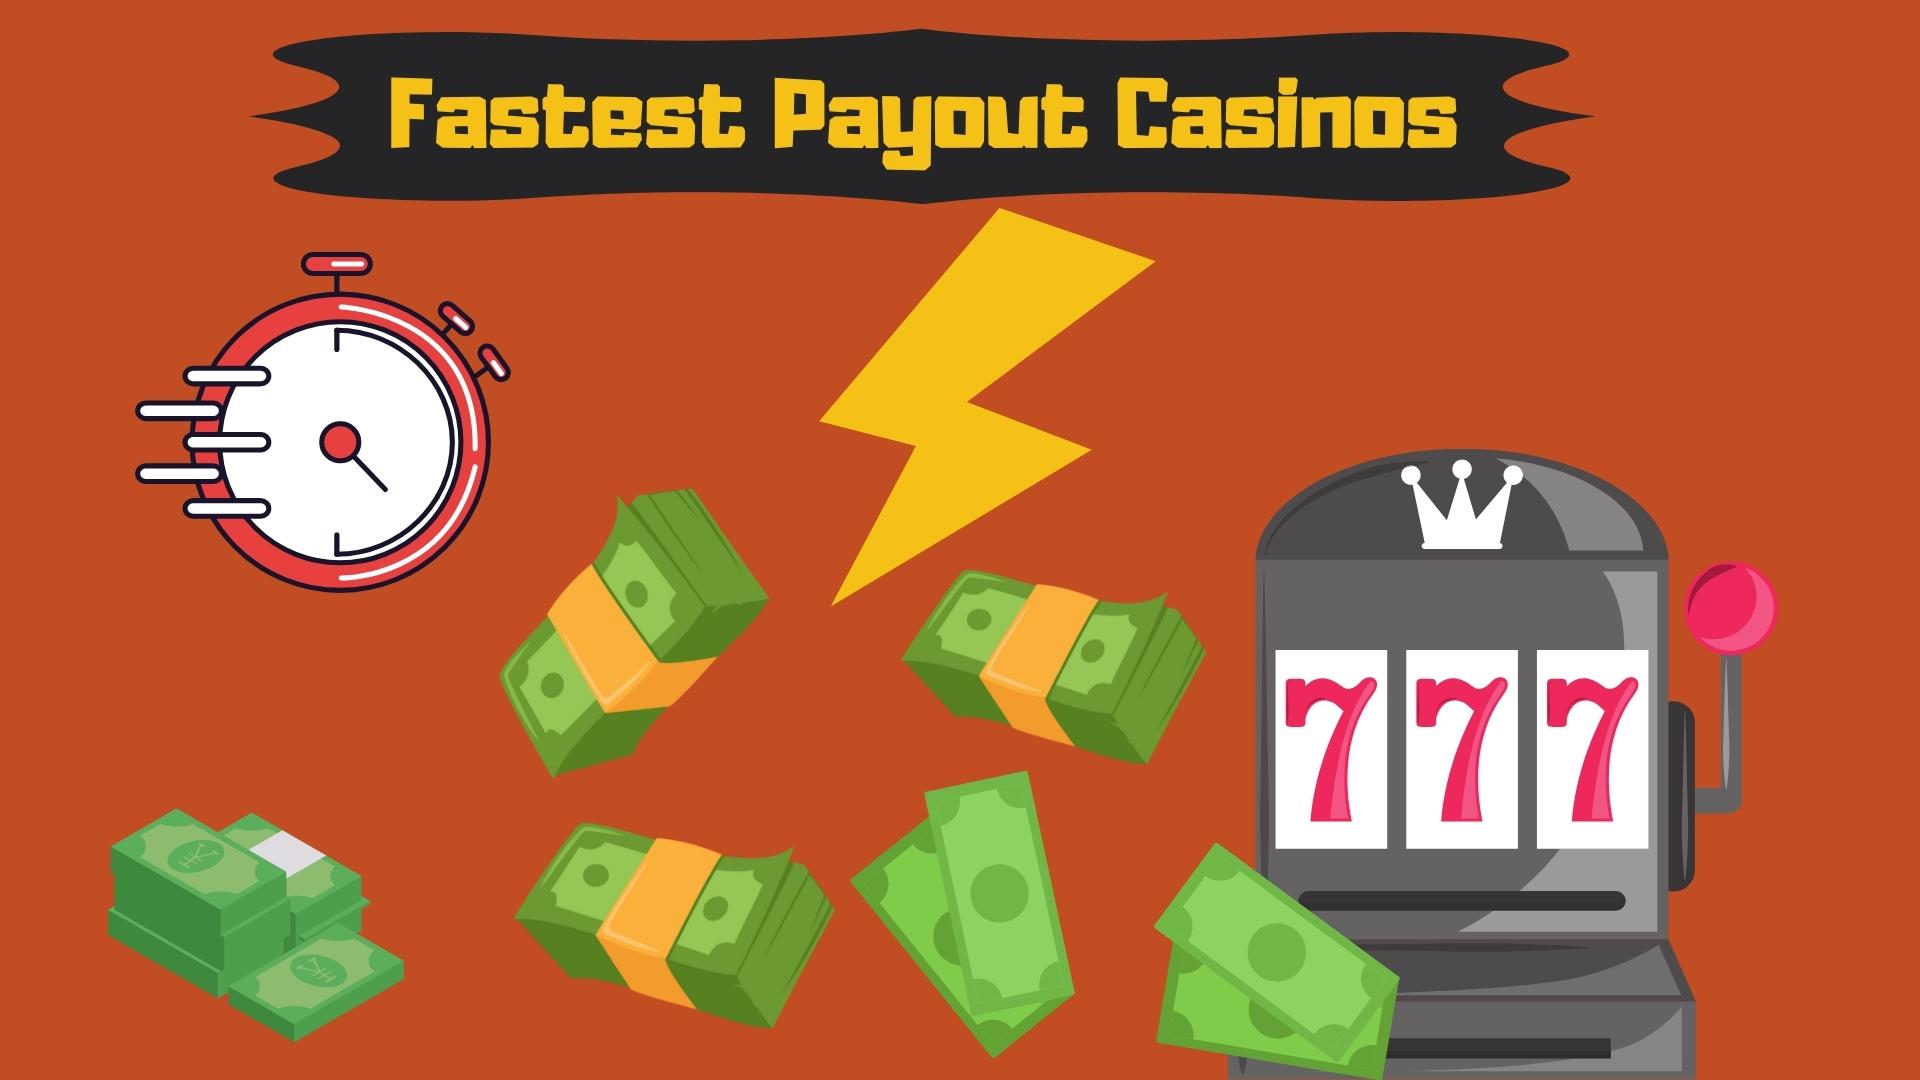 Fastest Payout Casinos What And Who Are They